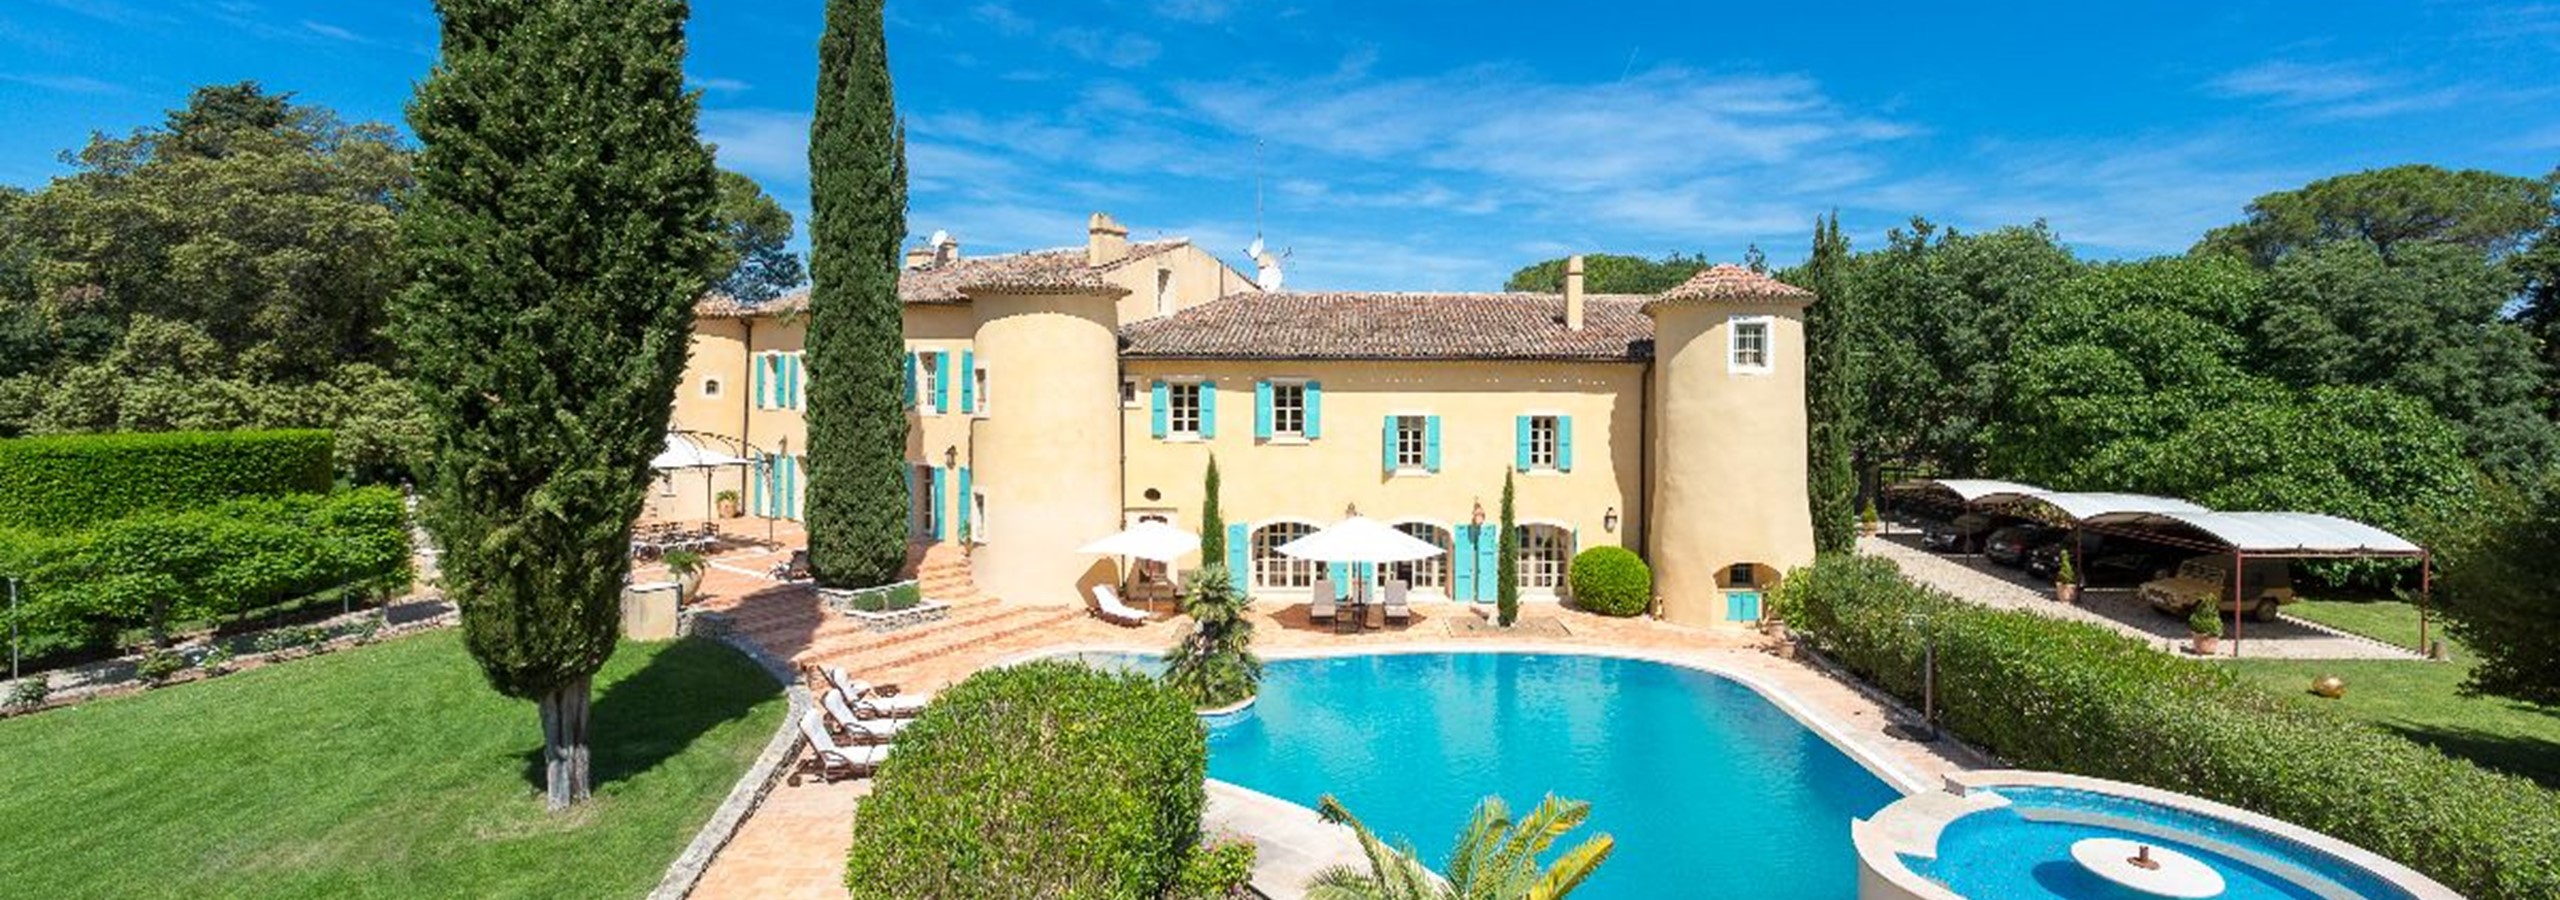 Stay in a Vineyard Chateau in Provence